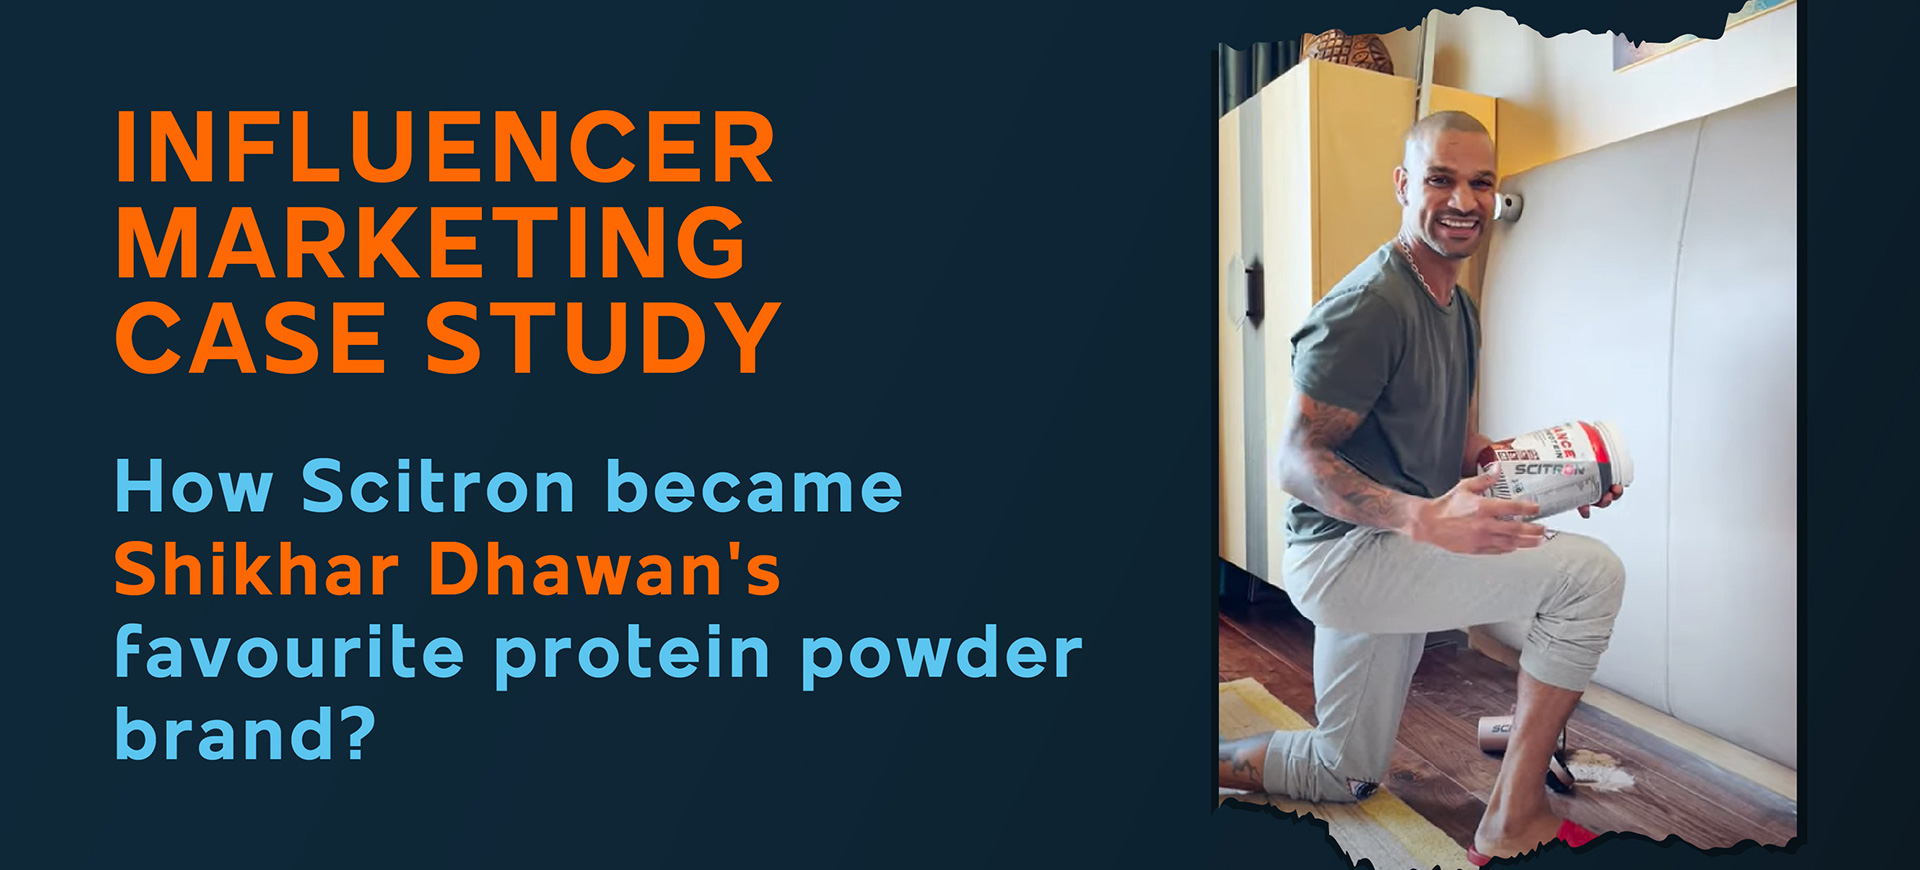 Influencer Marketing Case Study : How Scitron became Shikhar Dhawan's Favourite Protein Powder Brand?